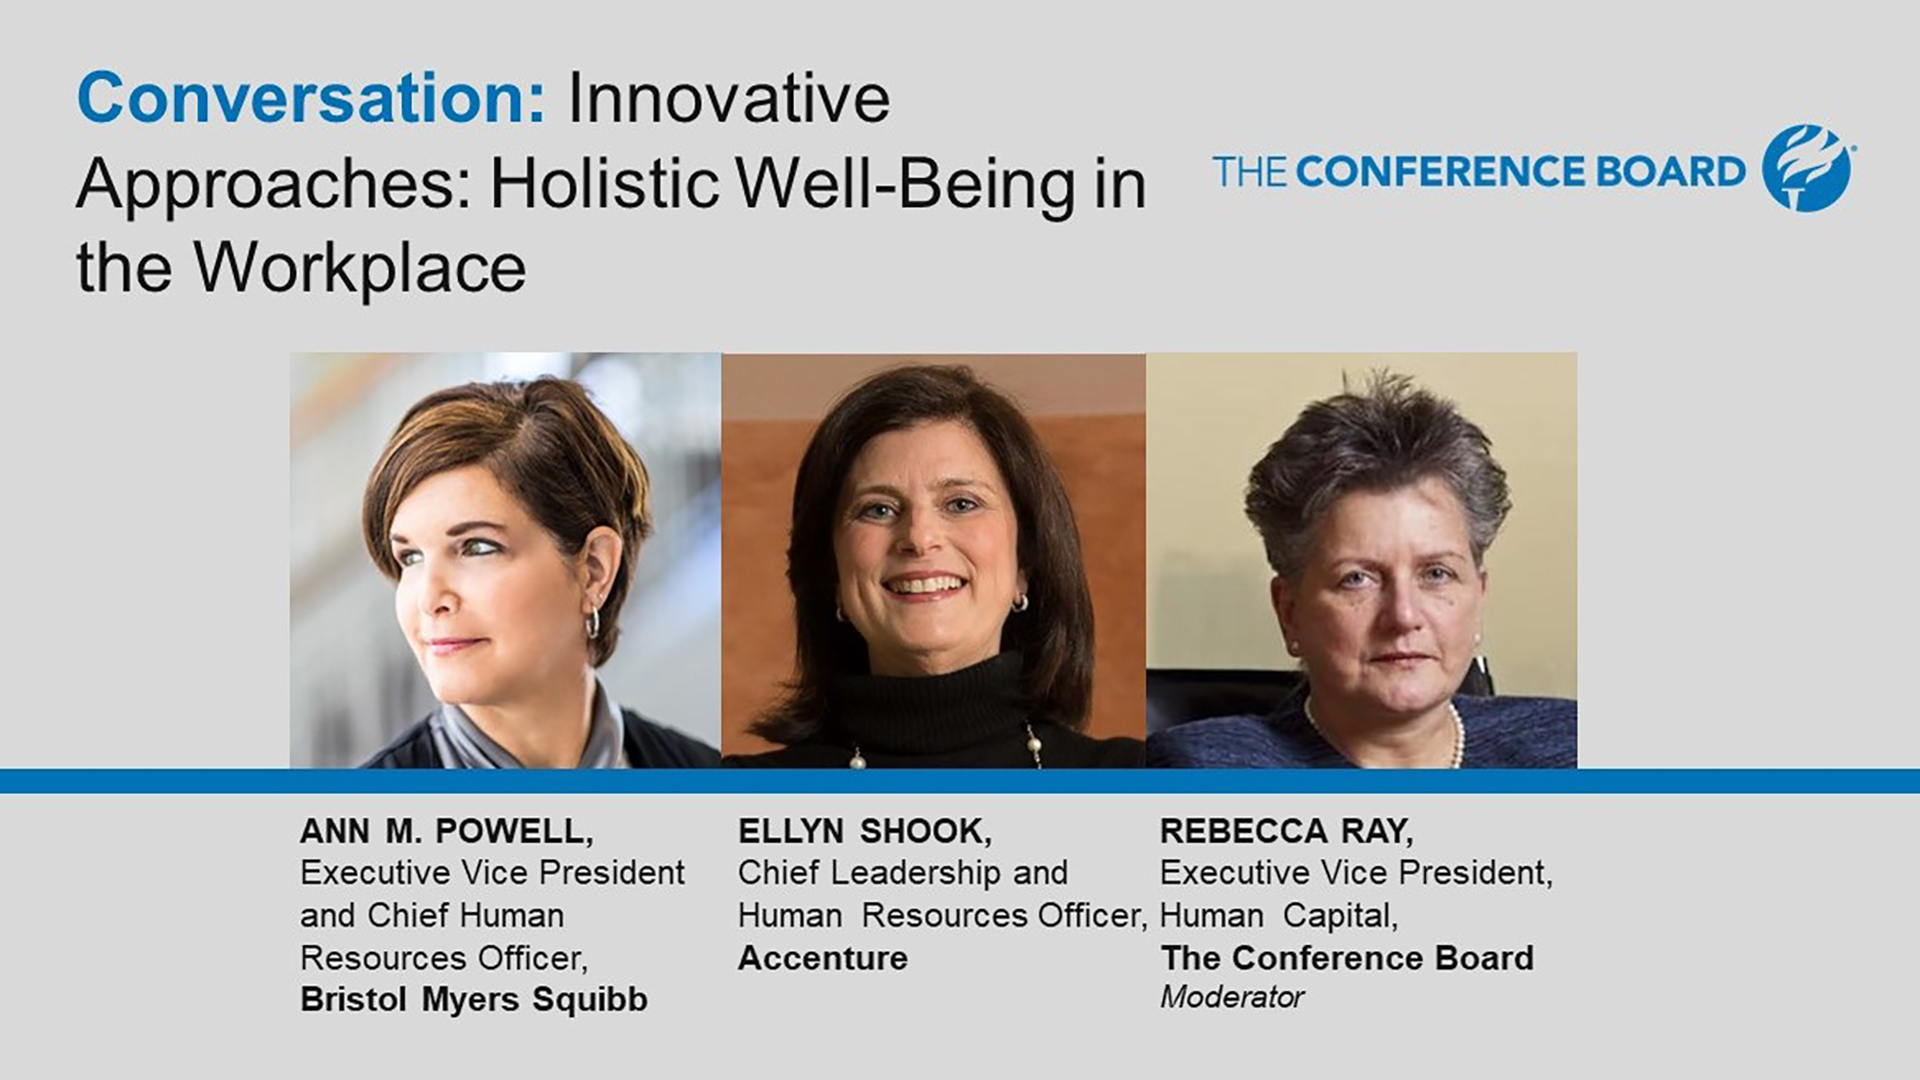 Building a More Civil & Just Society Session J: Innovative Approaches: Holistic Well-Being in the Workplace. 33 Mins